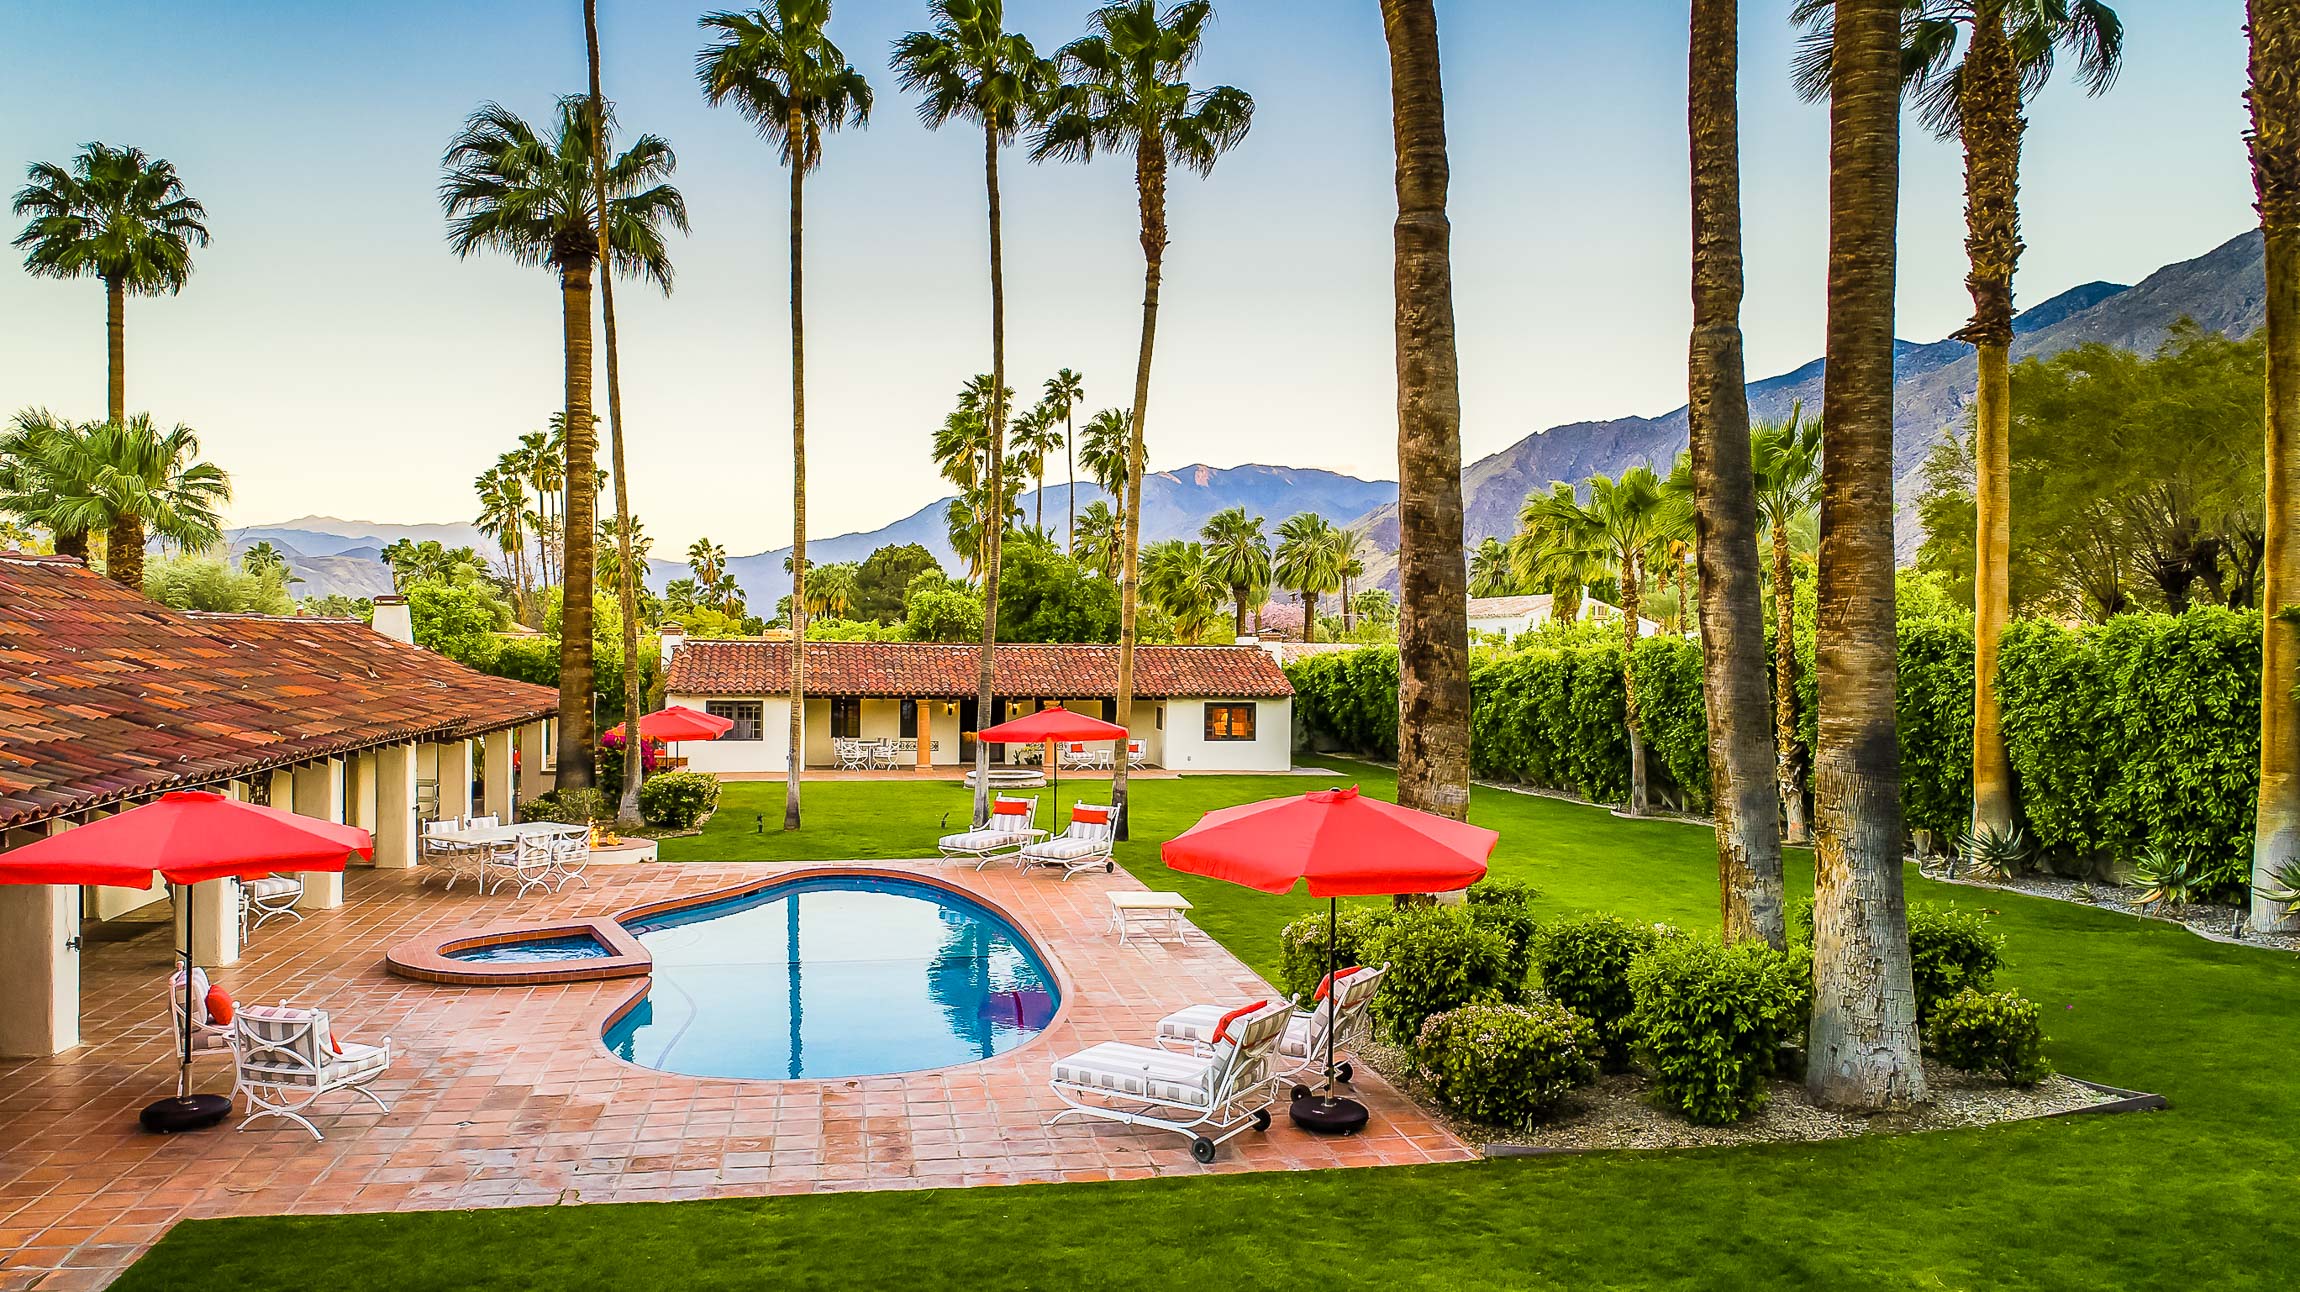 The Harold Lloyd Estate - Villas for Rent in Palm Springs, California,  United States - Airbnb